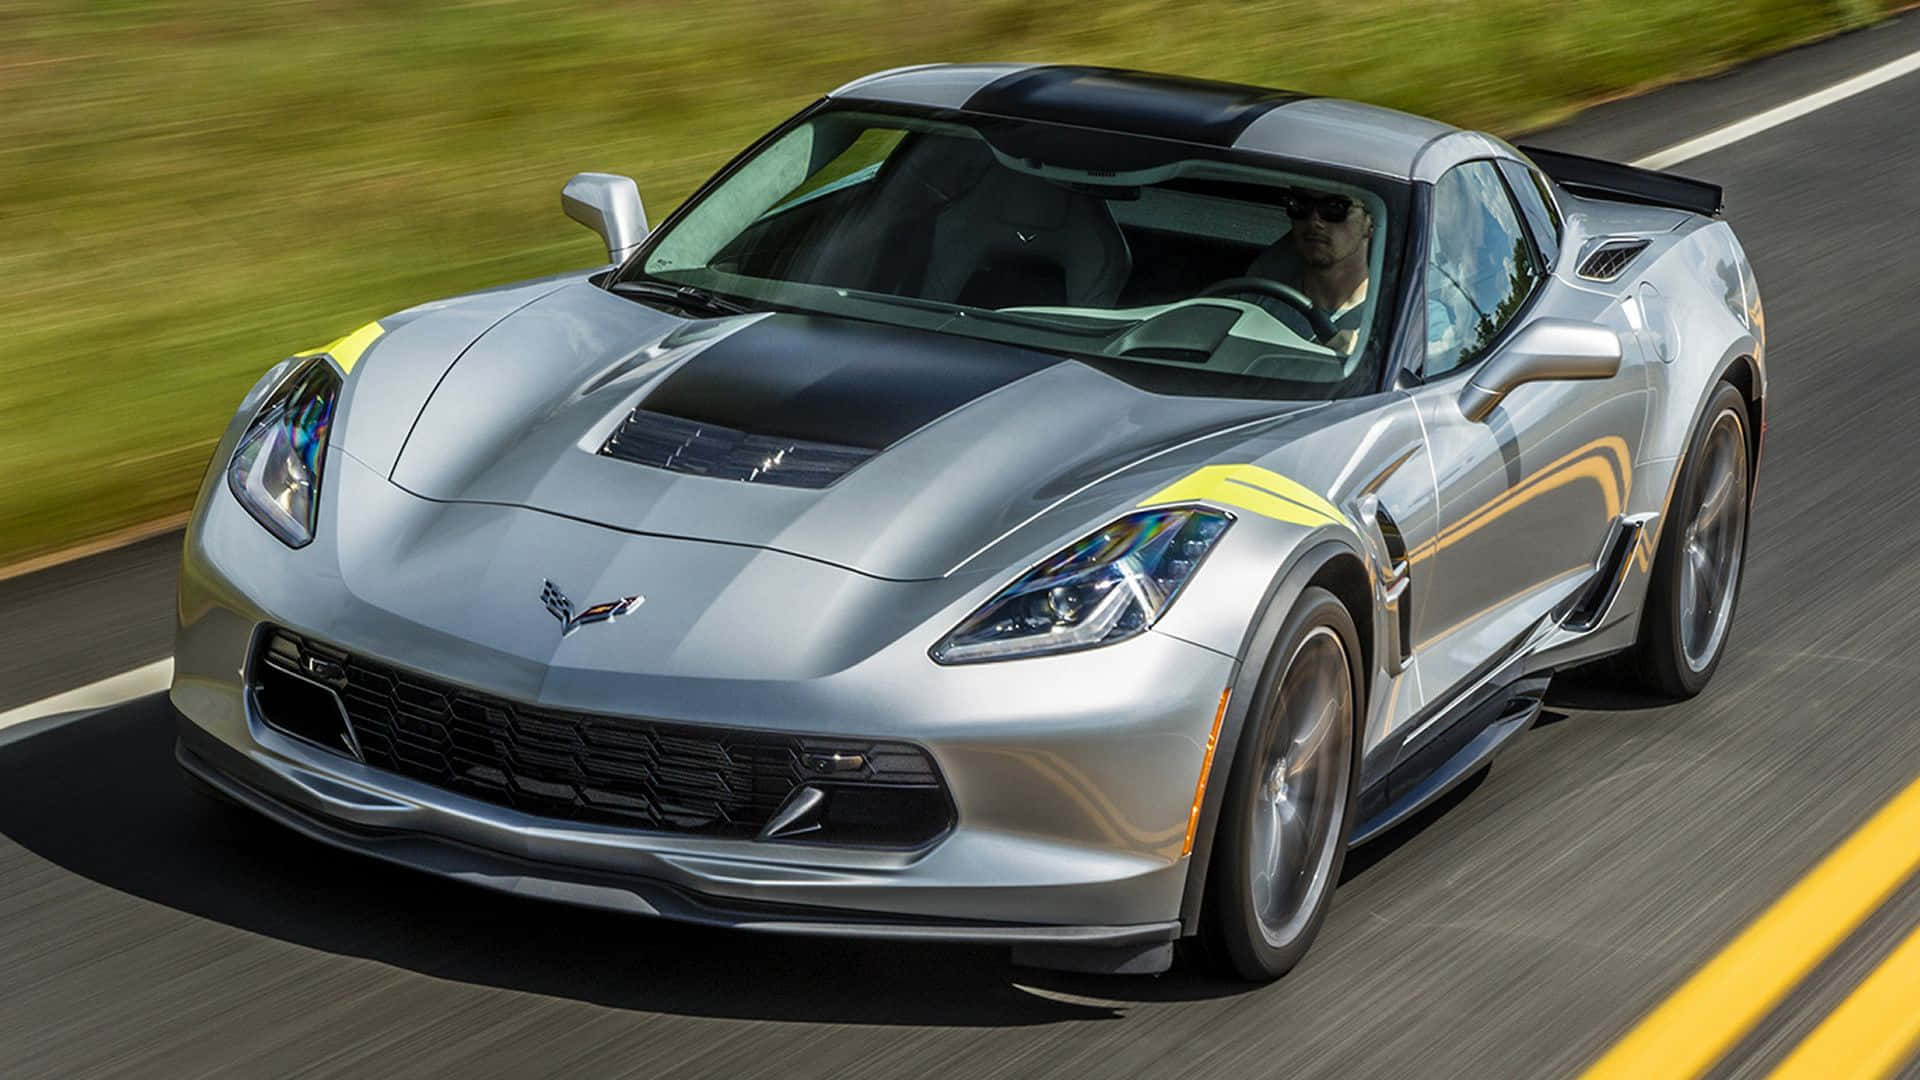 The Power and Style of the Chevrolet Corvette Grand Sport Wallpaper